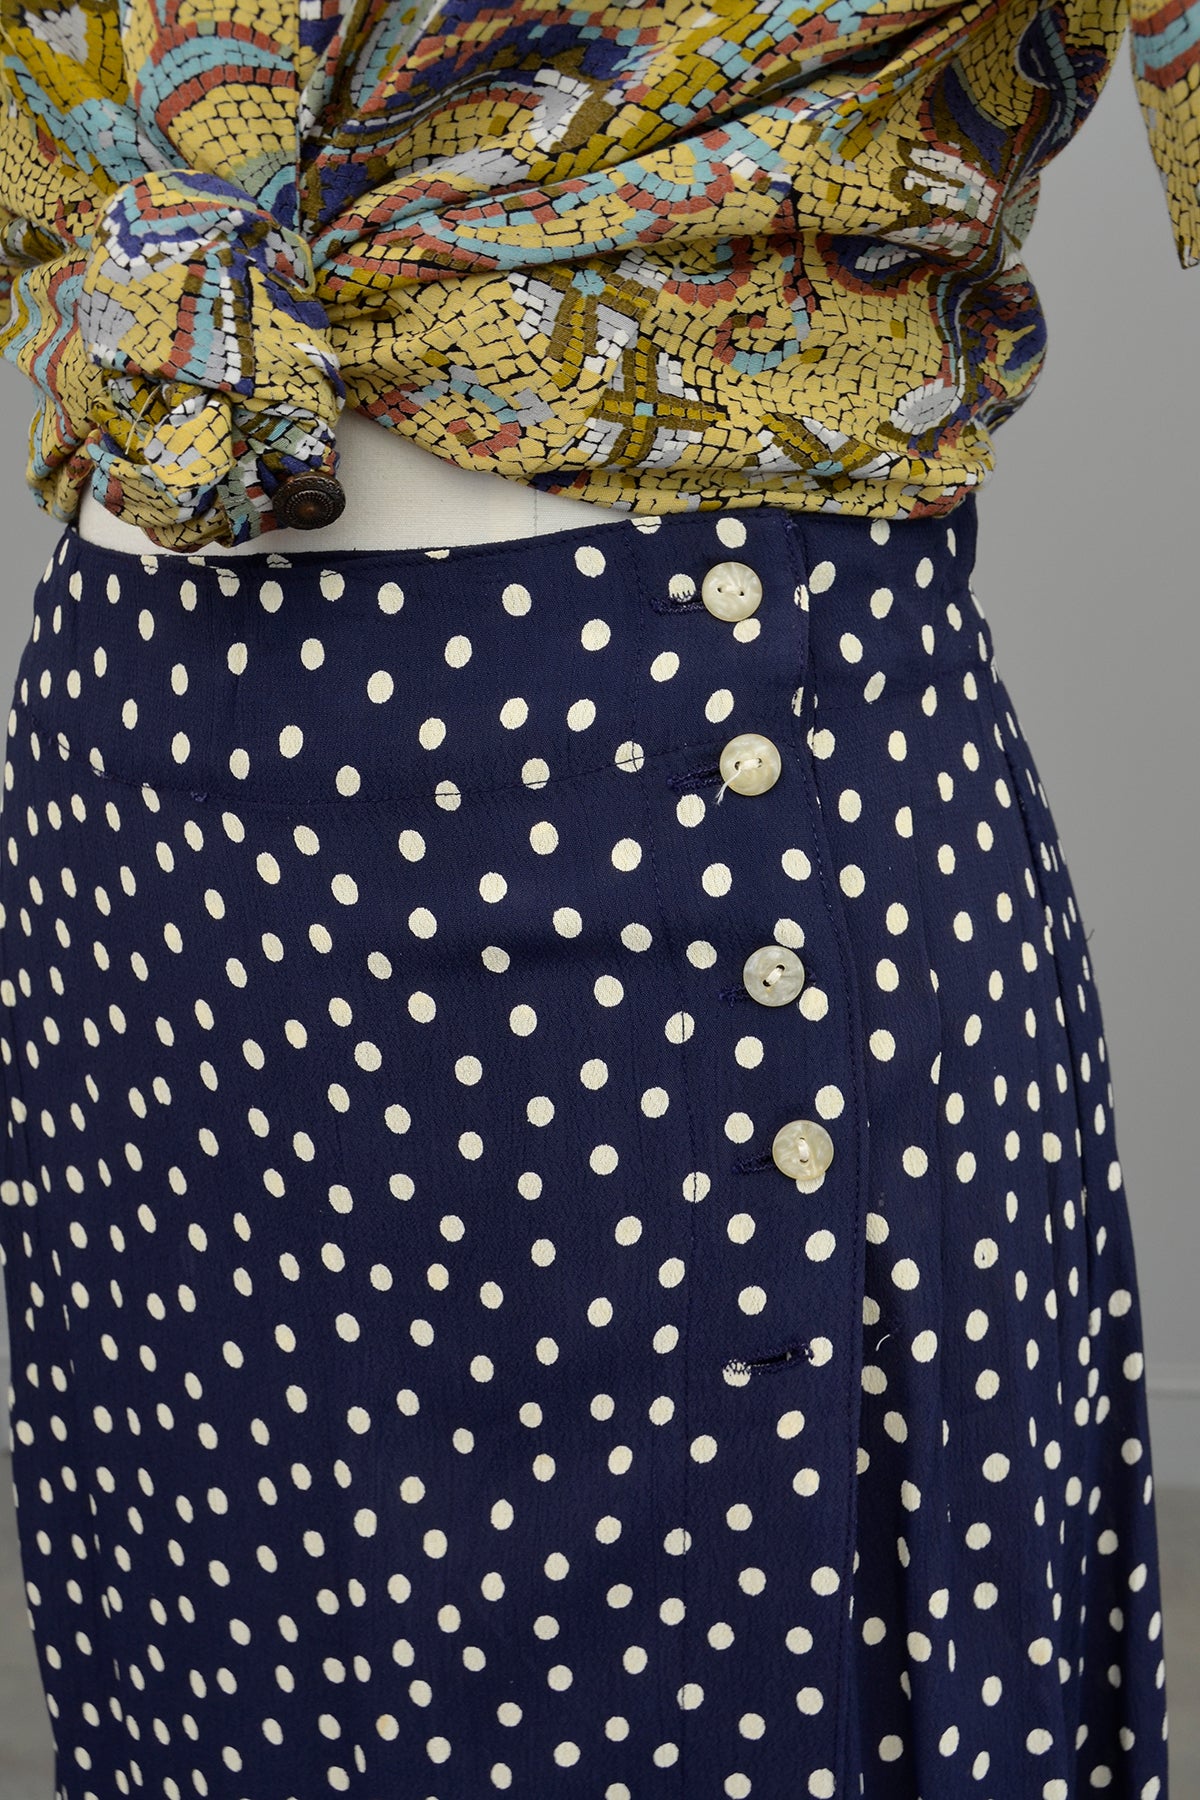 1990s Navy Blue White Polka Dot Rayon Wrap Skirt Vintage Inspired by Anthropologie